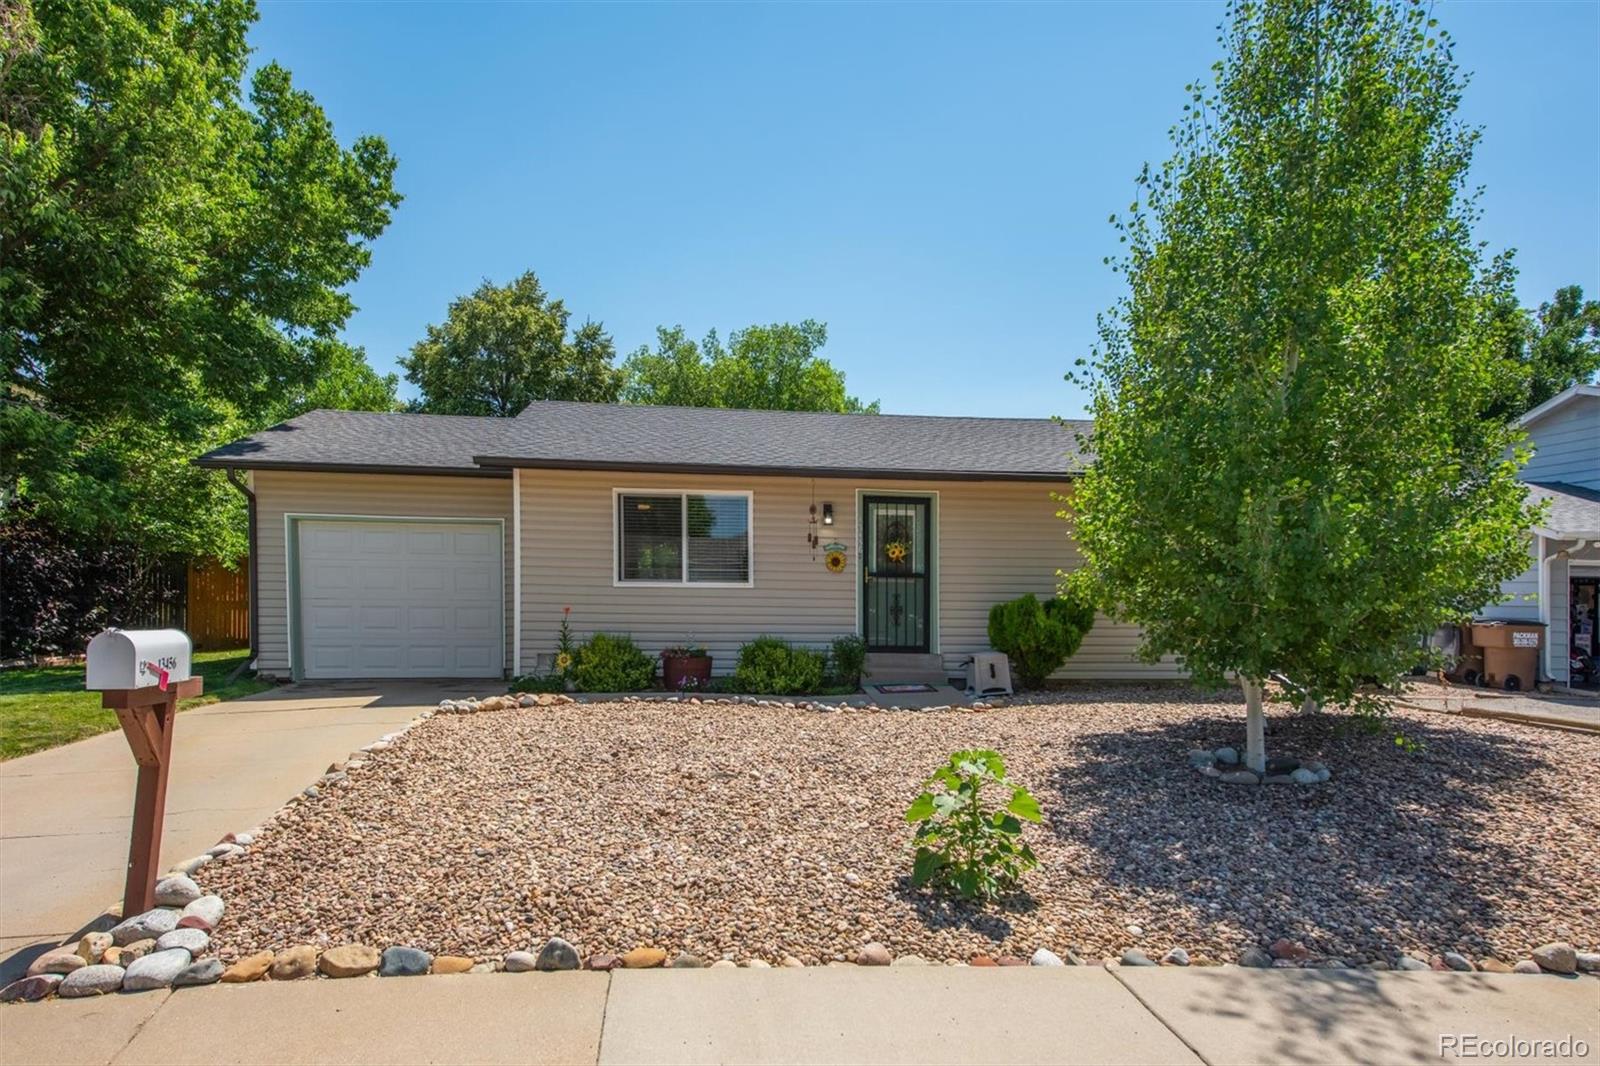 Report Image for 13456  Bryant Way,Broomfield, Colorado